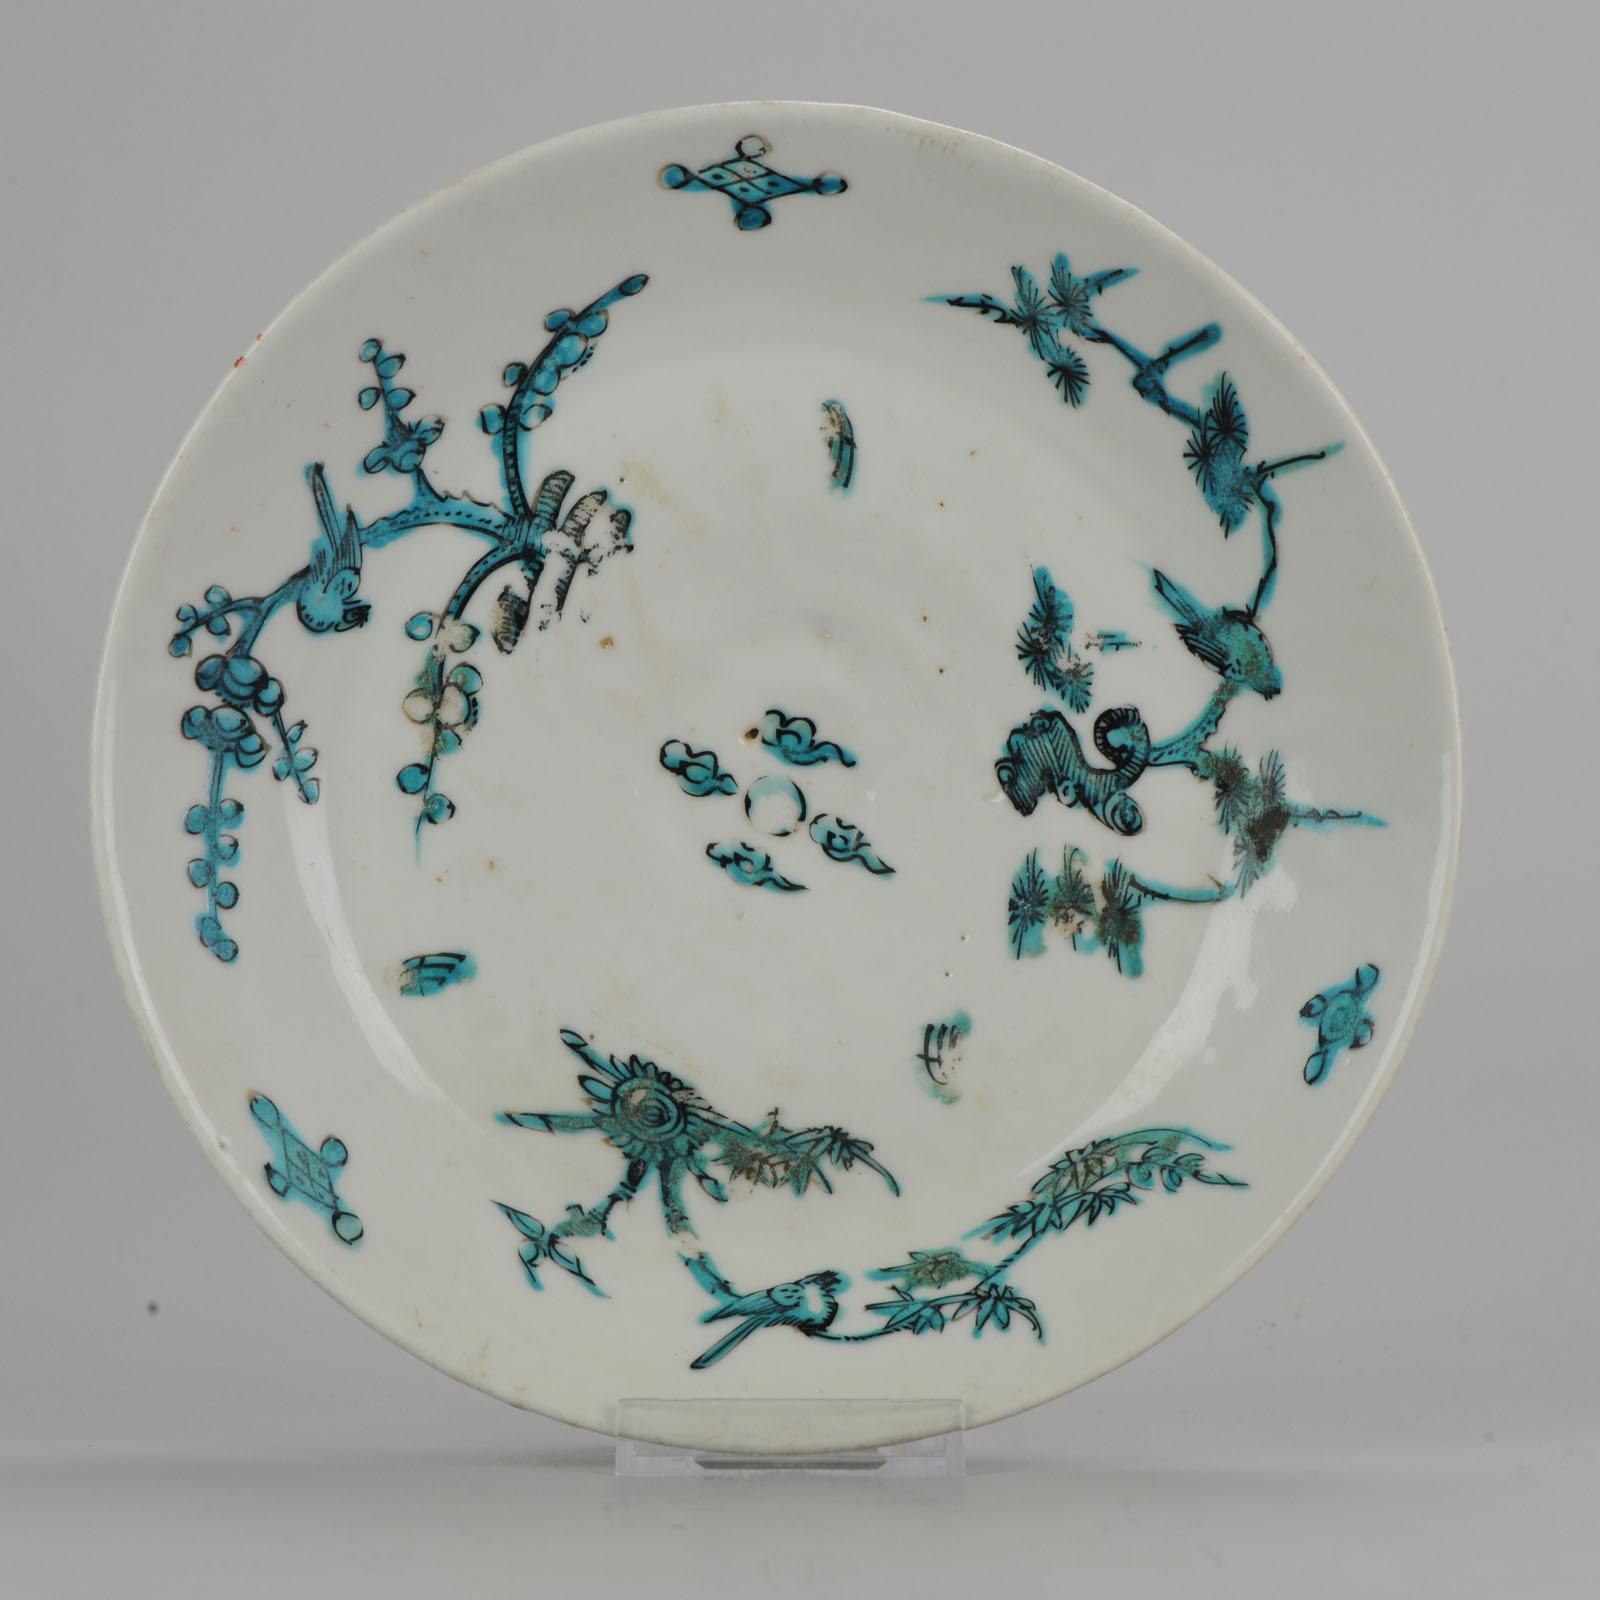 A very nicely decorated plate. Ming period. South Chinese Ming Zhangzhou Swatow. Three friends of winter with birds

 

21-10-19-1-8

 

Three friends of winter with birds

Pine, bamboo and prunus (plum) all symbolizes long life. Since